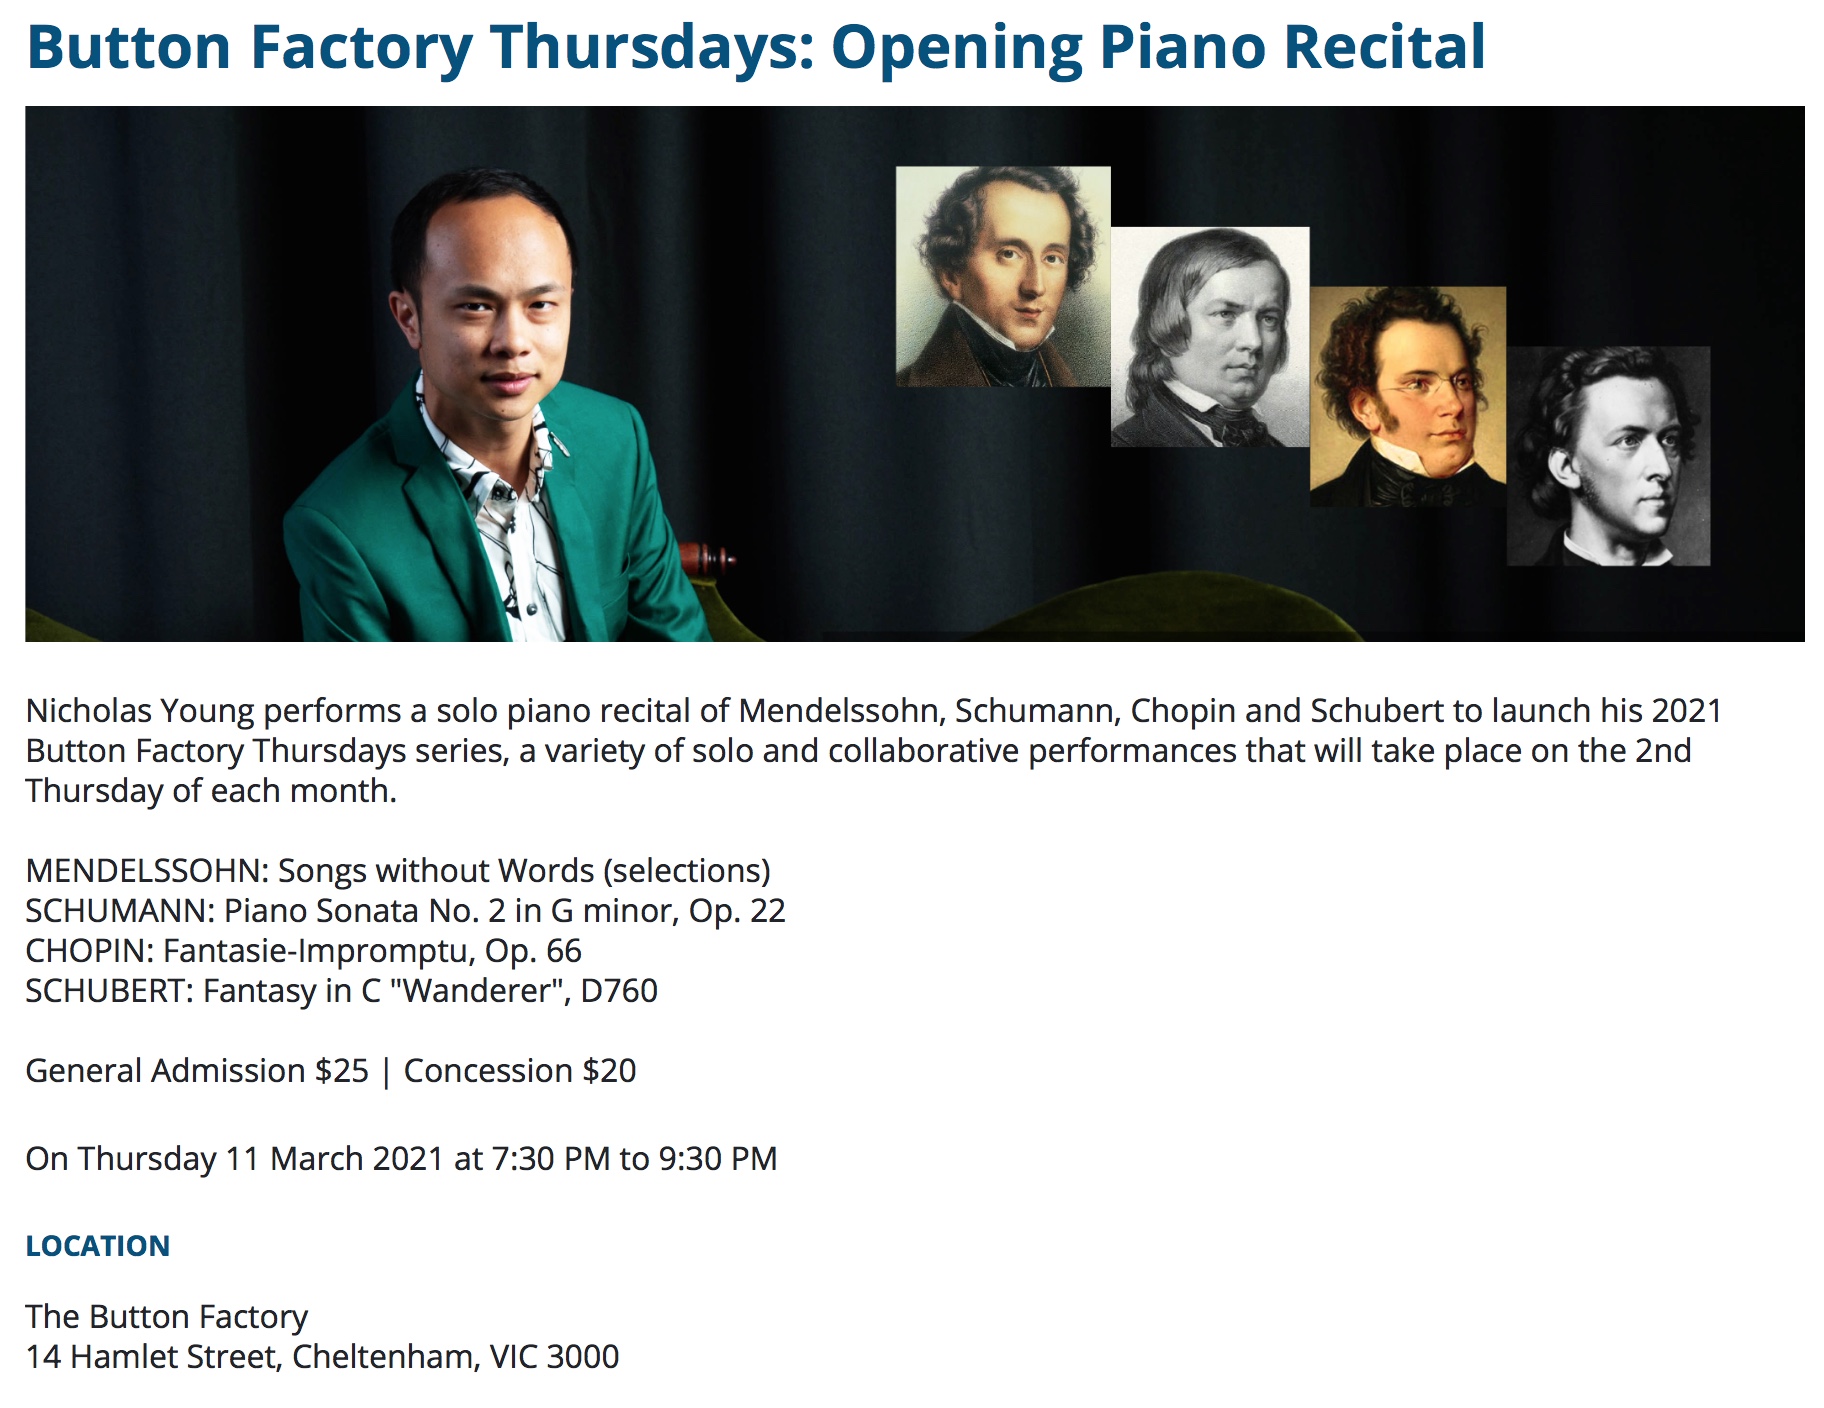 Nicholas Young @ The Button Factory: Opening Piano Recital Thursday 11th March @ 7.30pm …